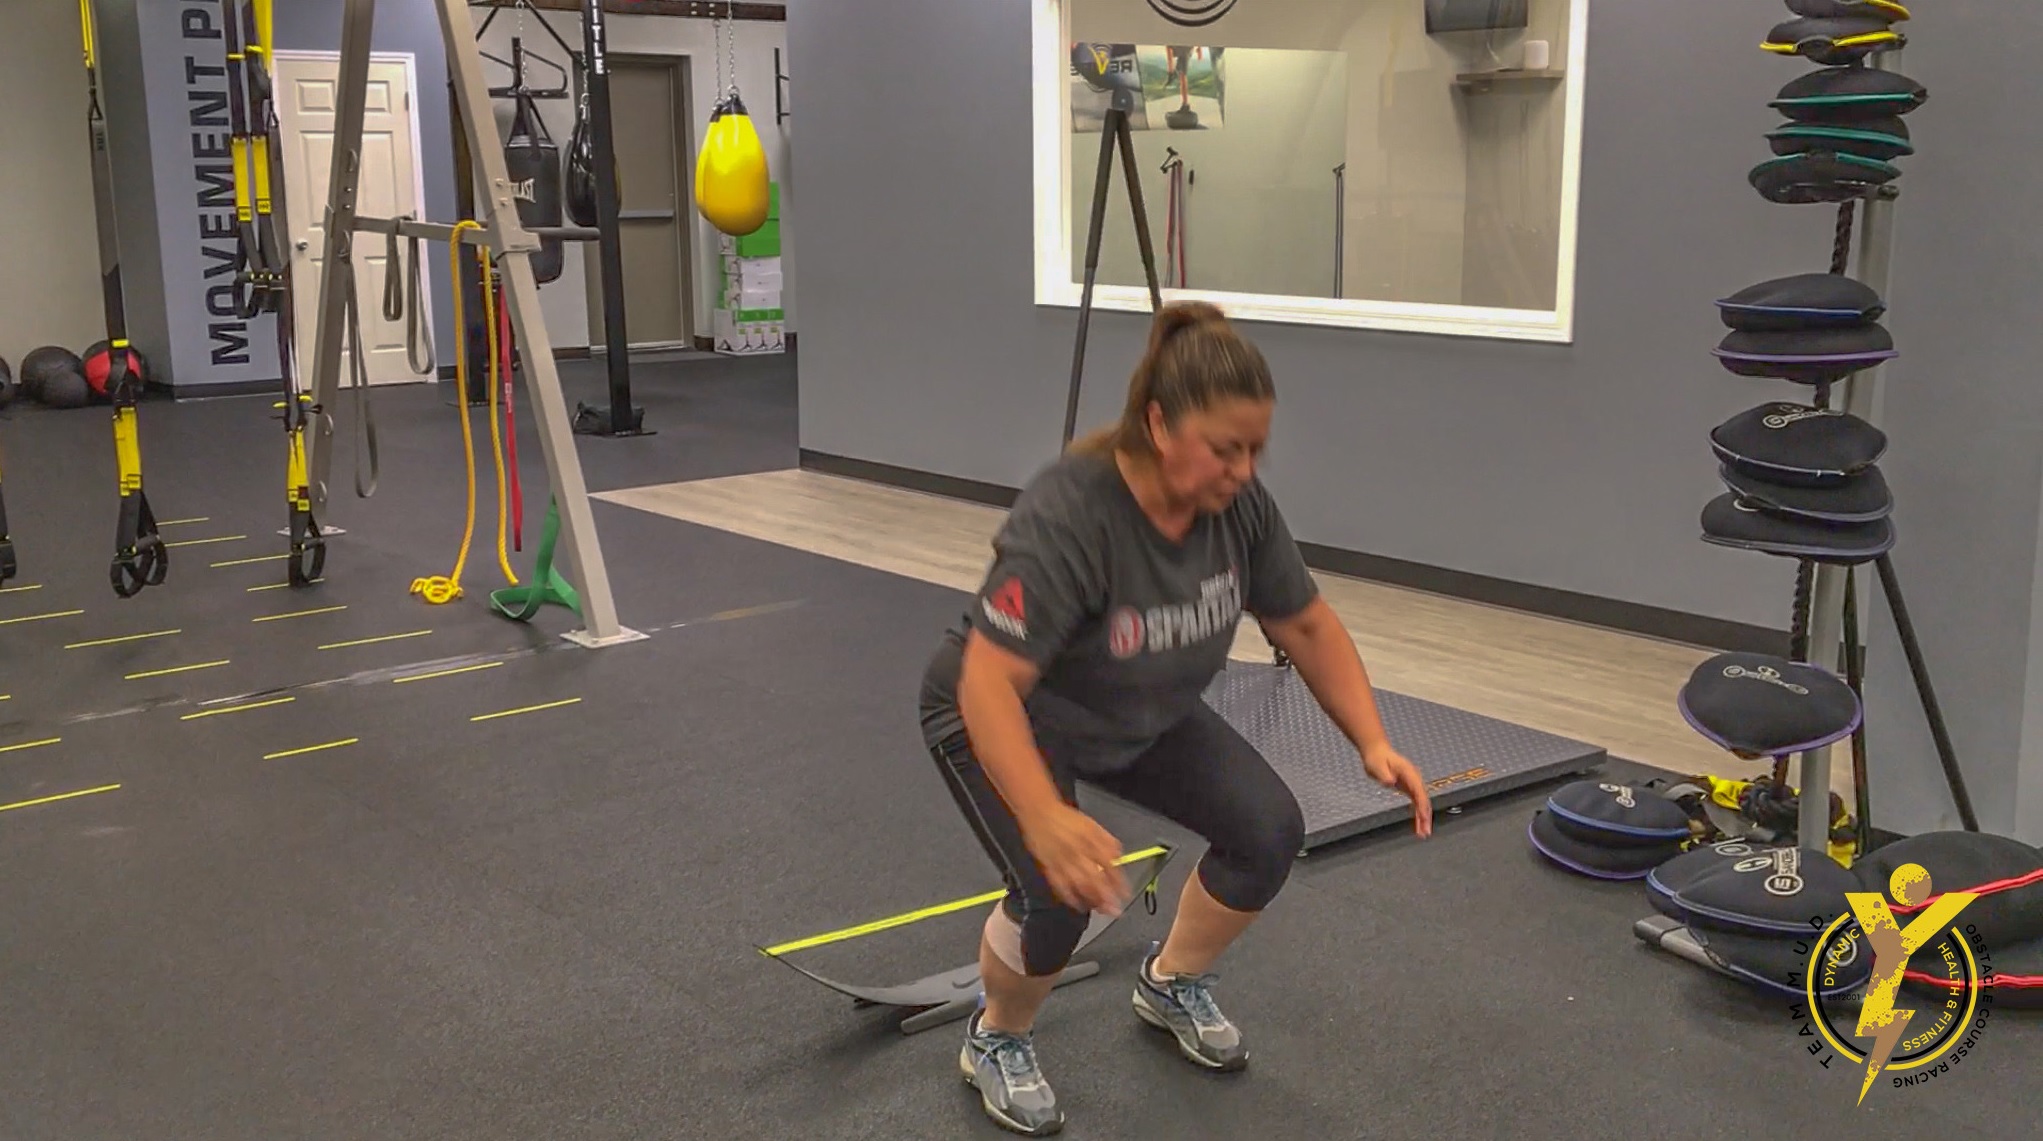 obstacle course training group classes near syracuse ny from dynamic health and fitness